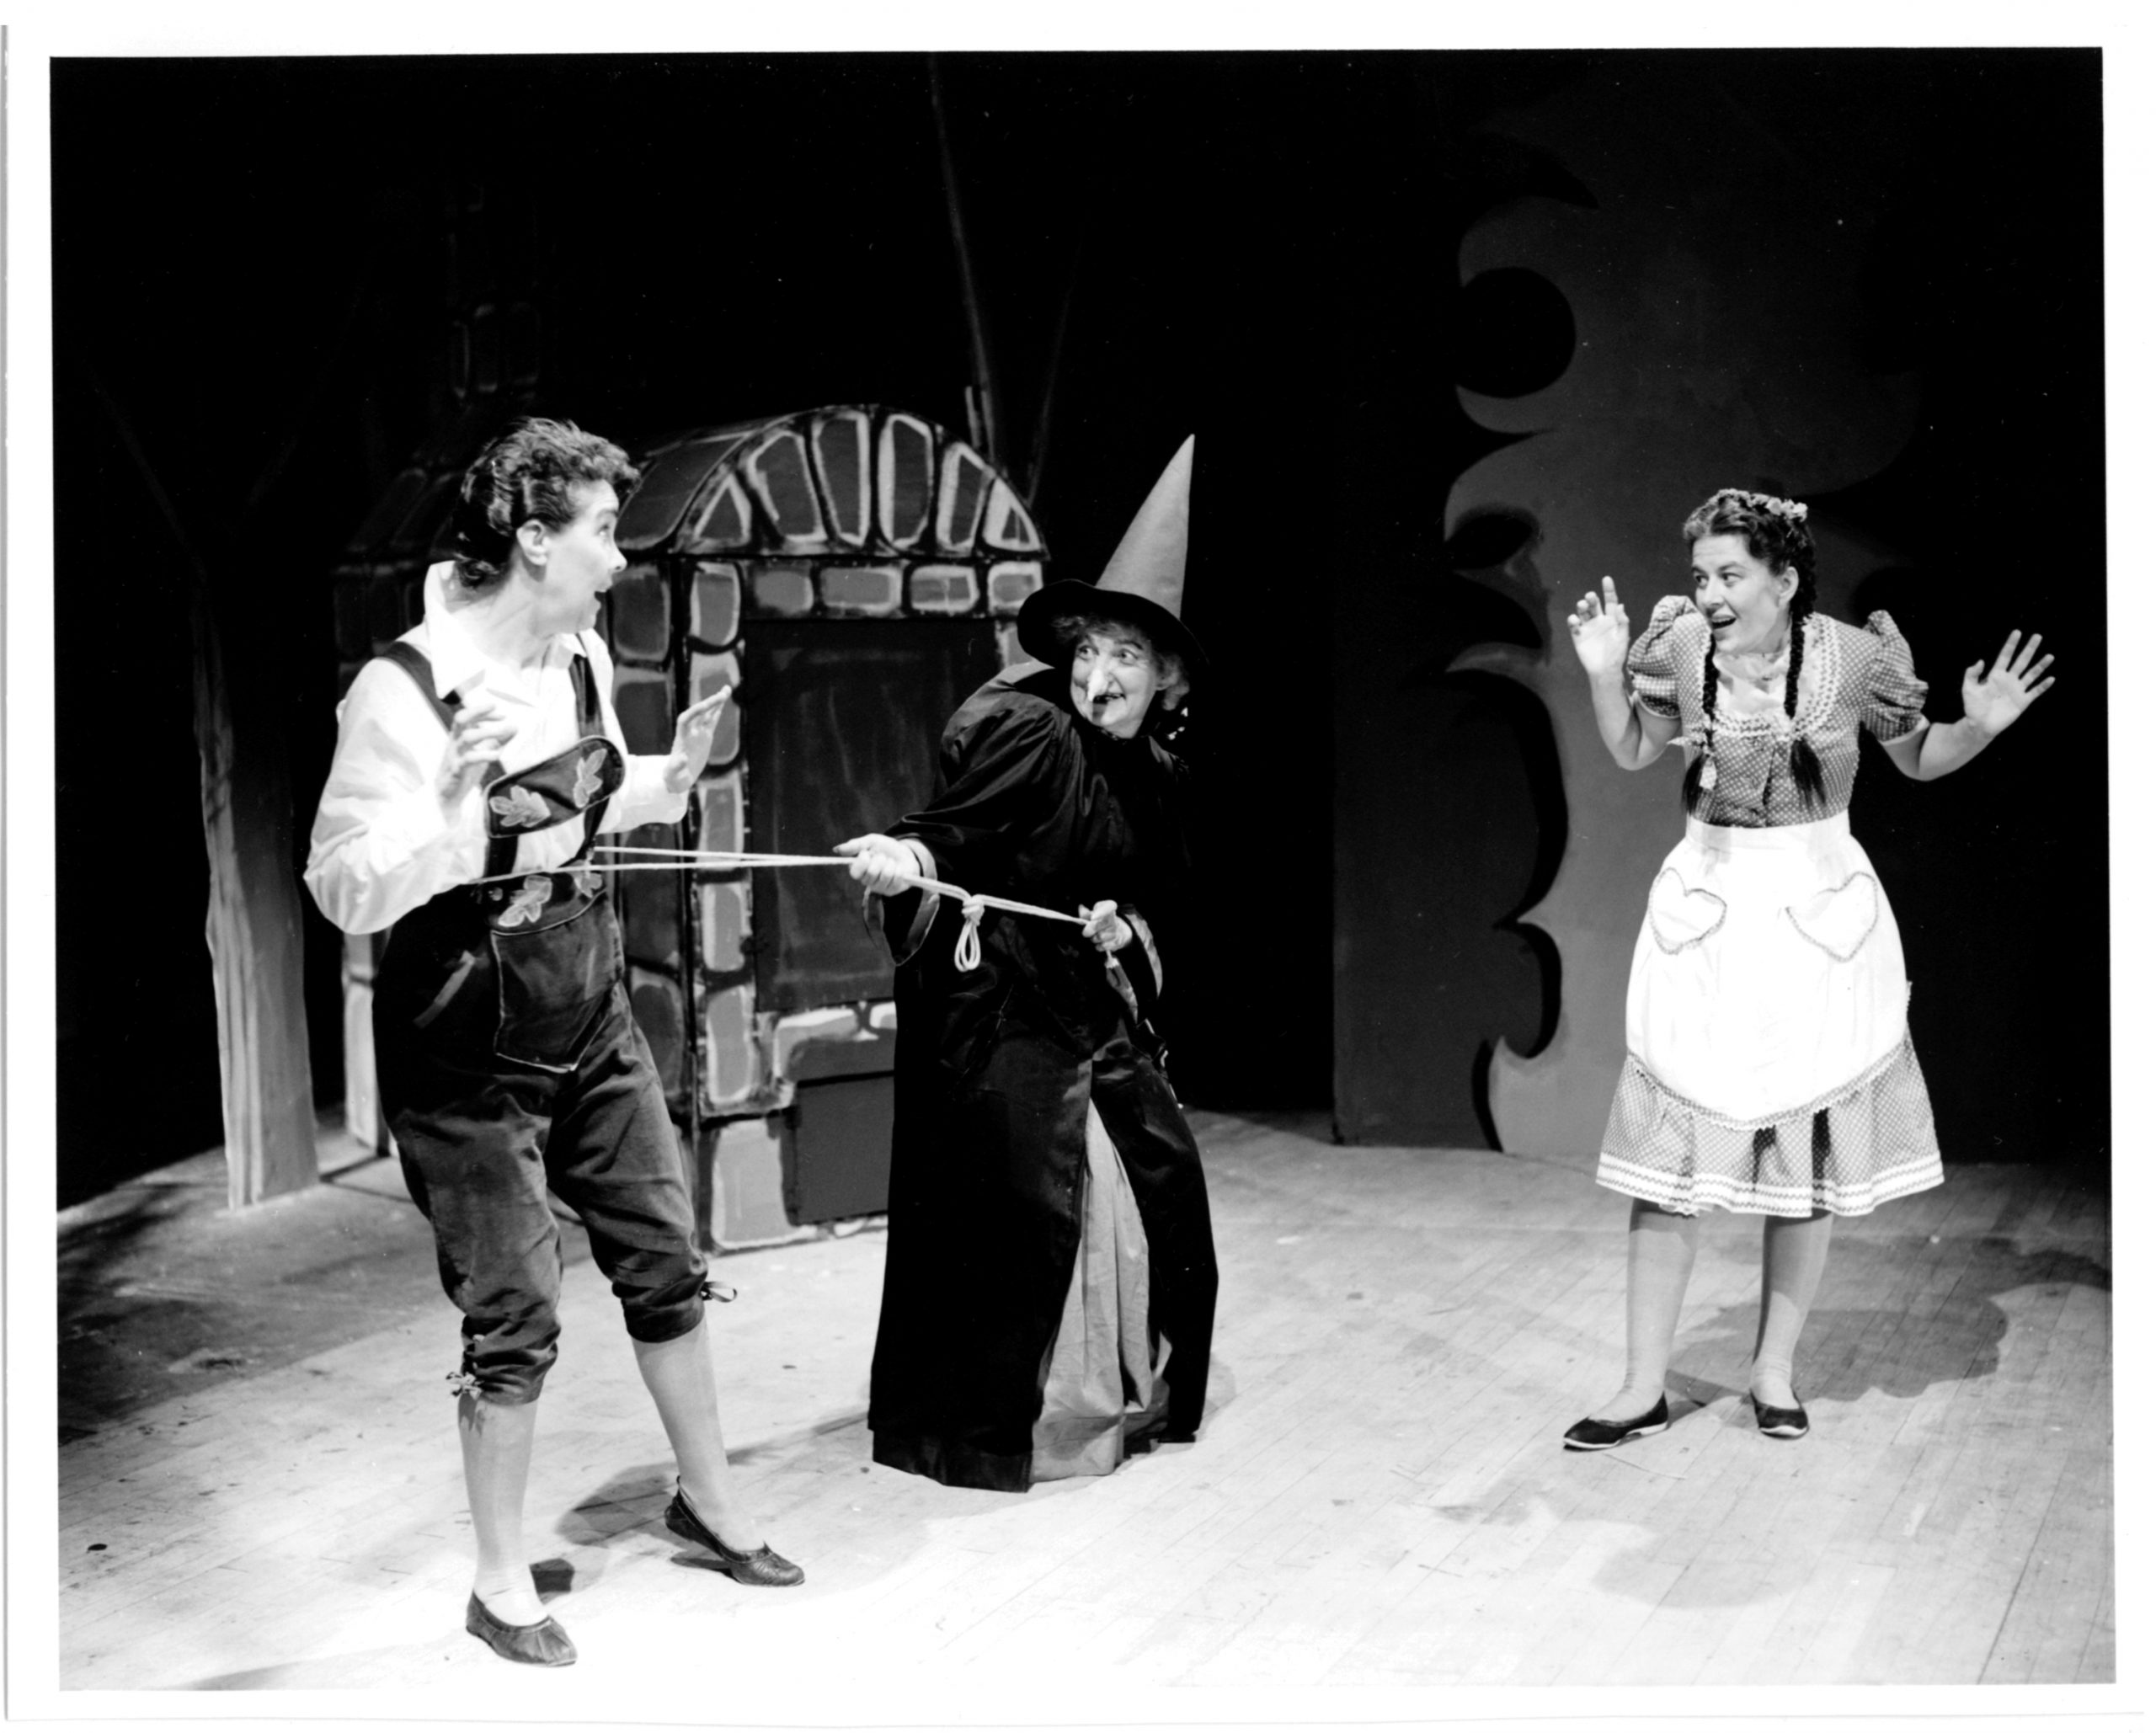 The Darke Hall stage was home to this 1959 production of Hansel and Gretel.
